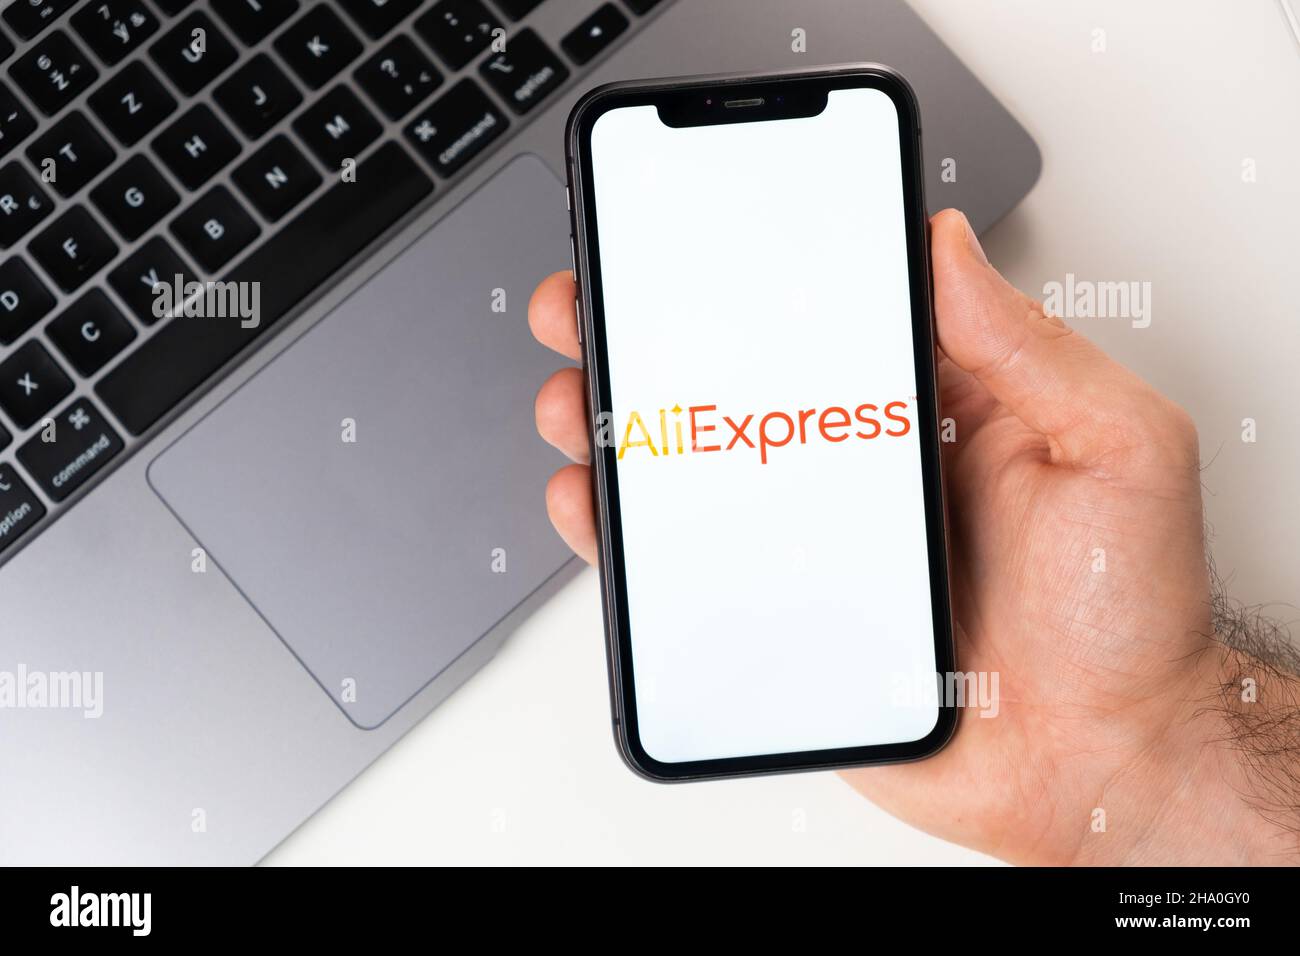 AliExpress mobile application on the smartphone screen. A mobile phone in a man hand near an open laptop. White background. November 2021, San Francisco, USA Stock Photo